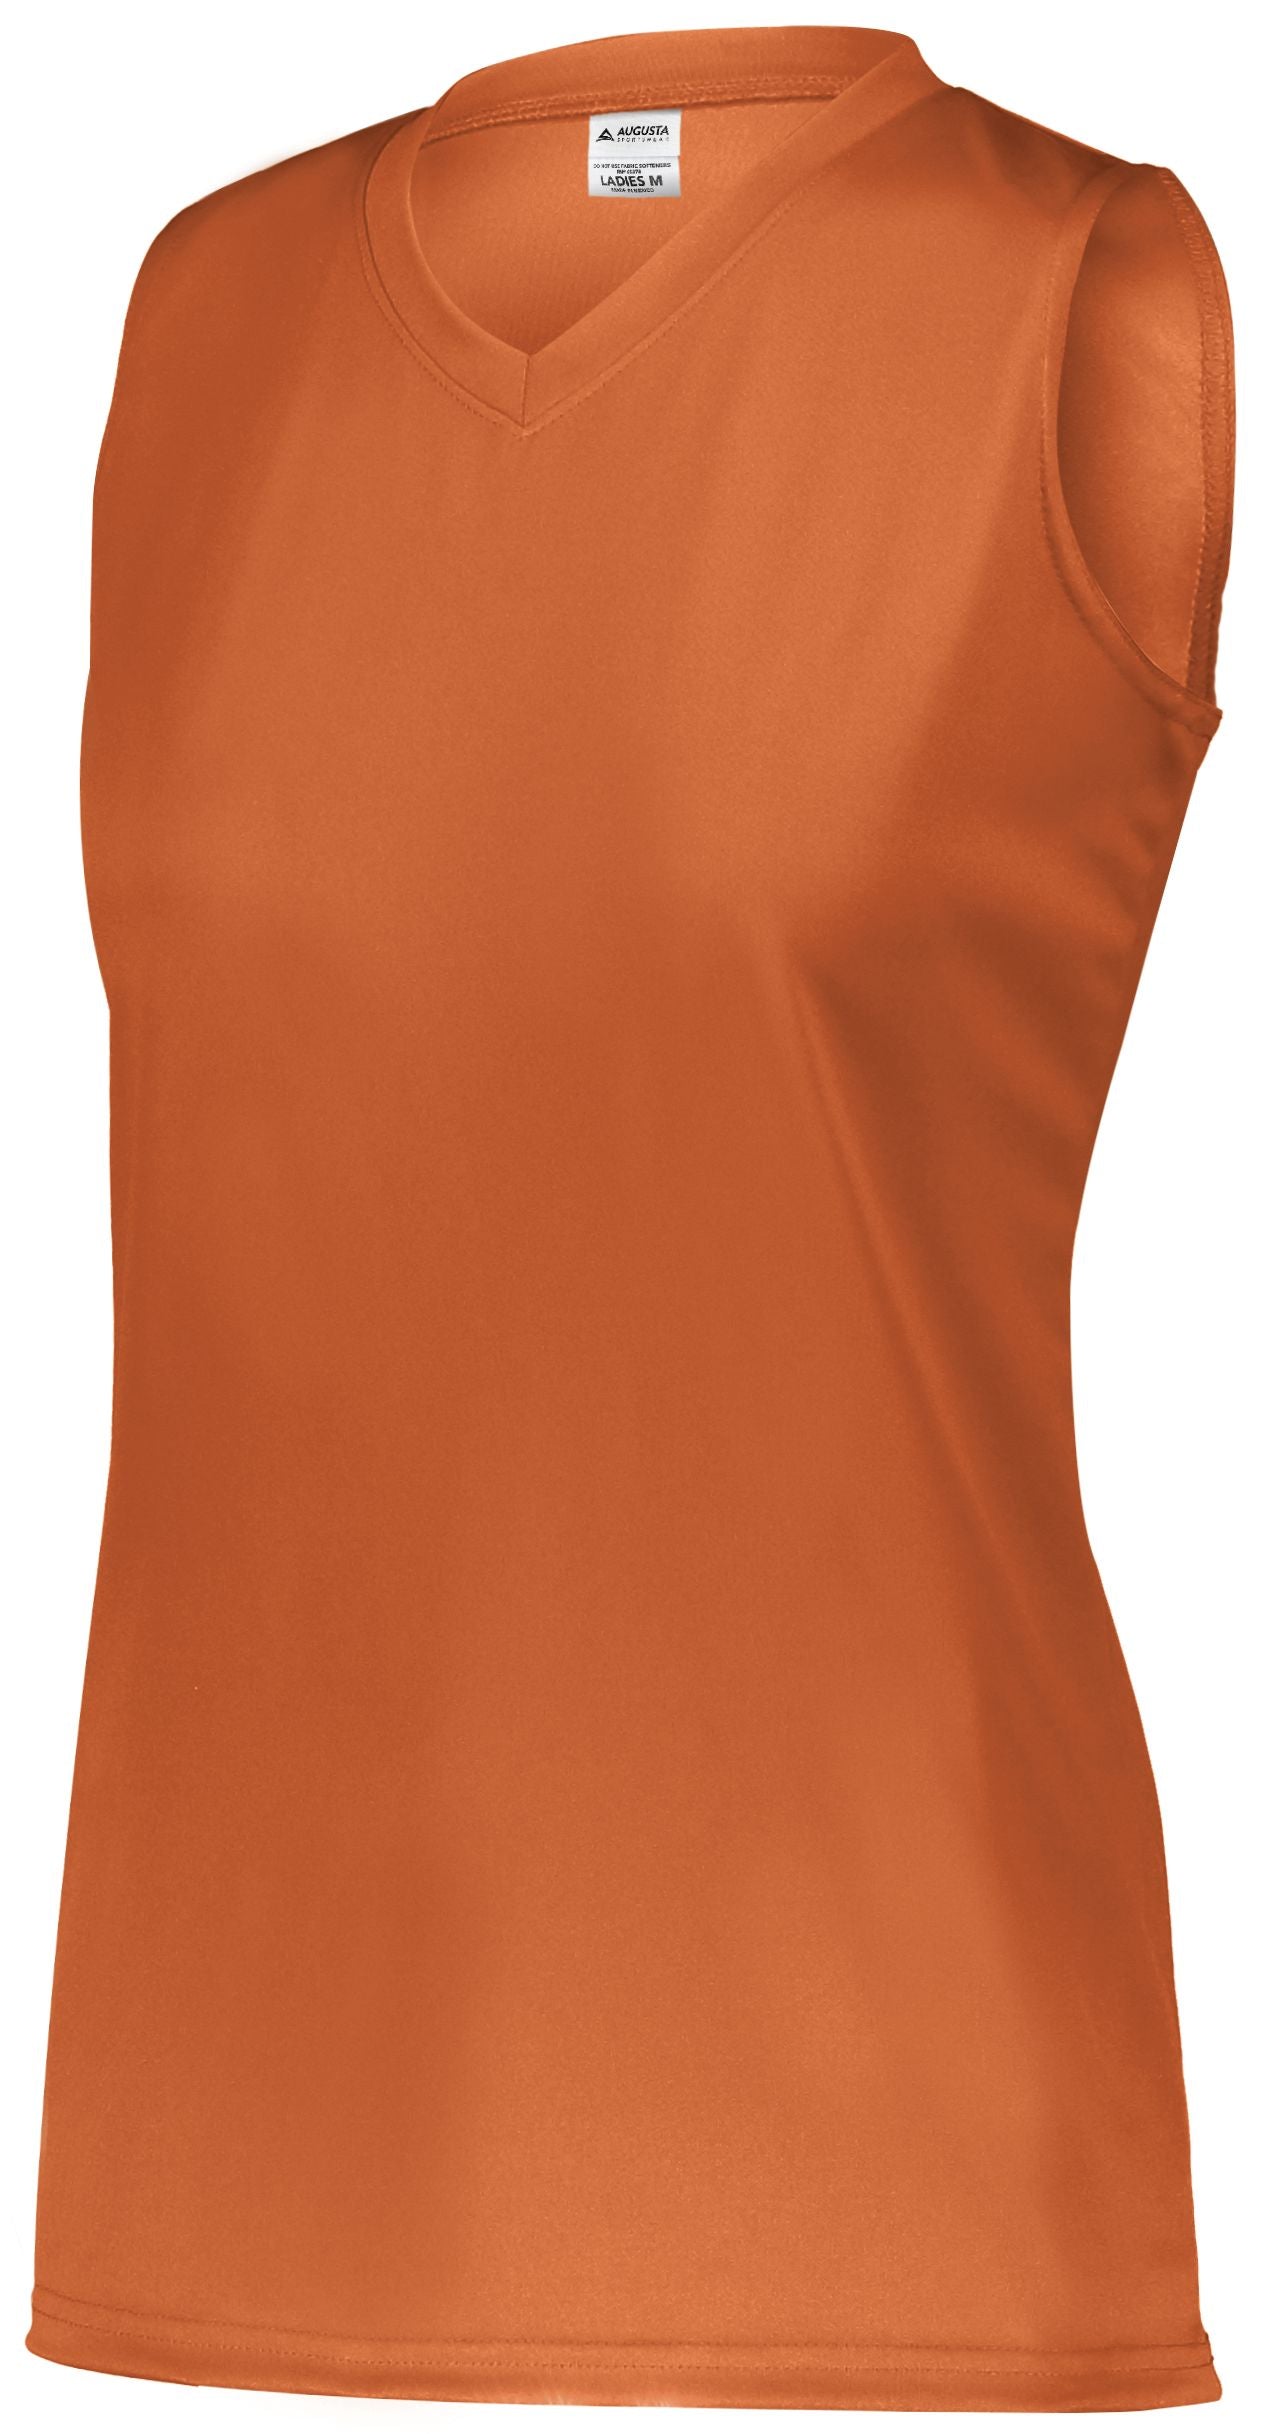 Augusta Sportswear Girls Attain Wicking Sleeveless Jersey in Orange  -Part of the Girls, Augusta-Products, Softball, Girls-Jersey, Shirts product lines at KanaleyCreations.com